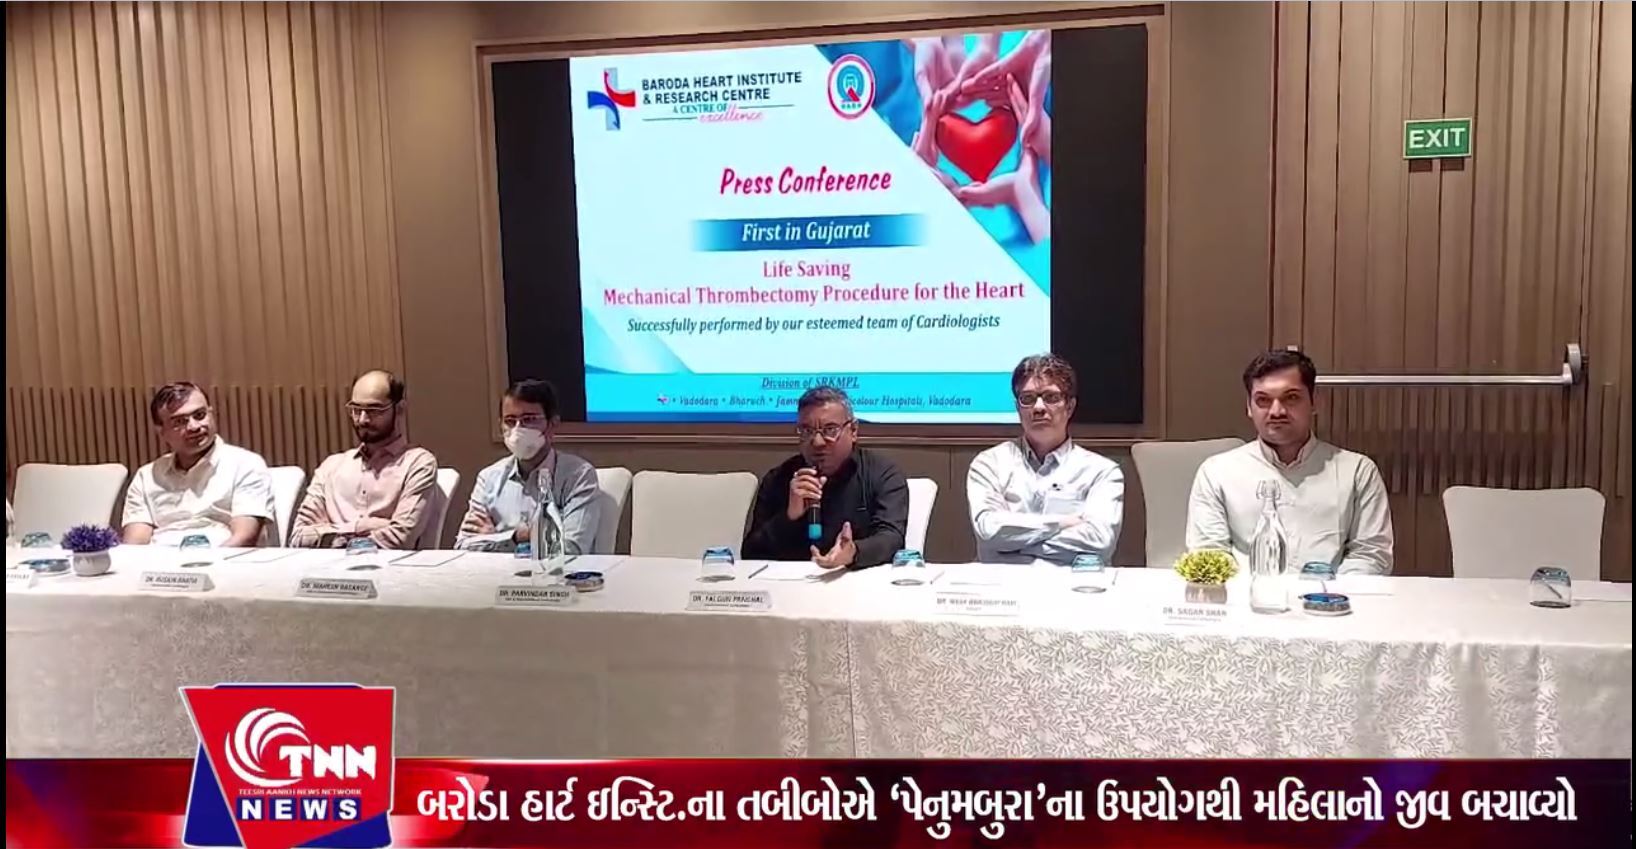 Baroda Heart Institute & Research Centre proudly announced the First-ever Life-Saving An Unique Intervention - Mechanical Thrombectomy for the heart in Gujarat.